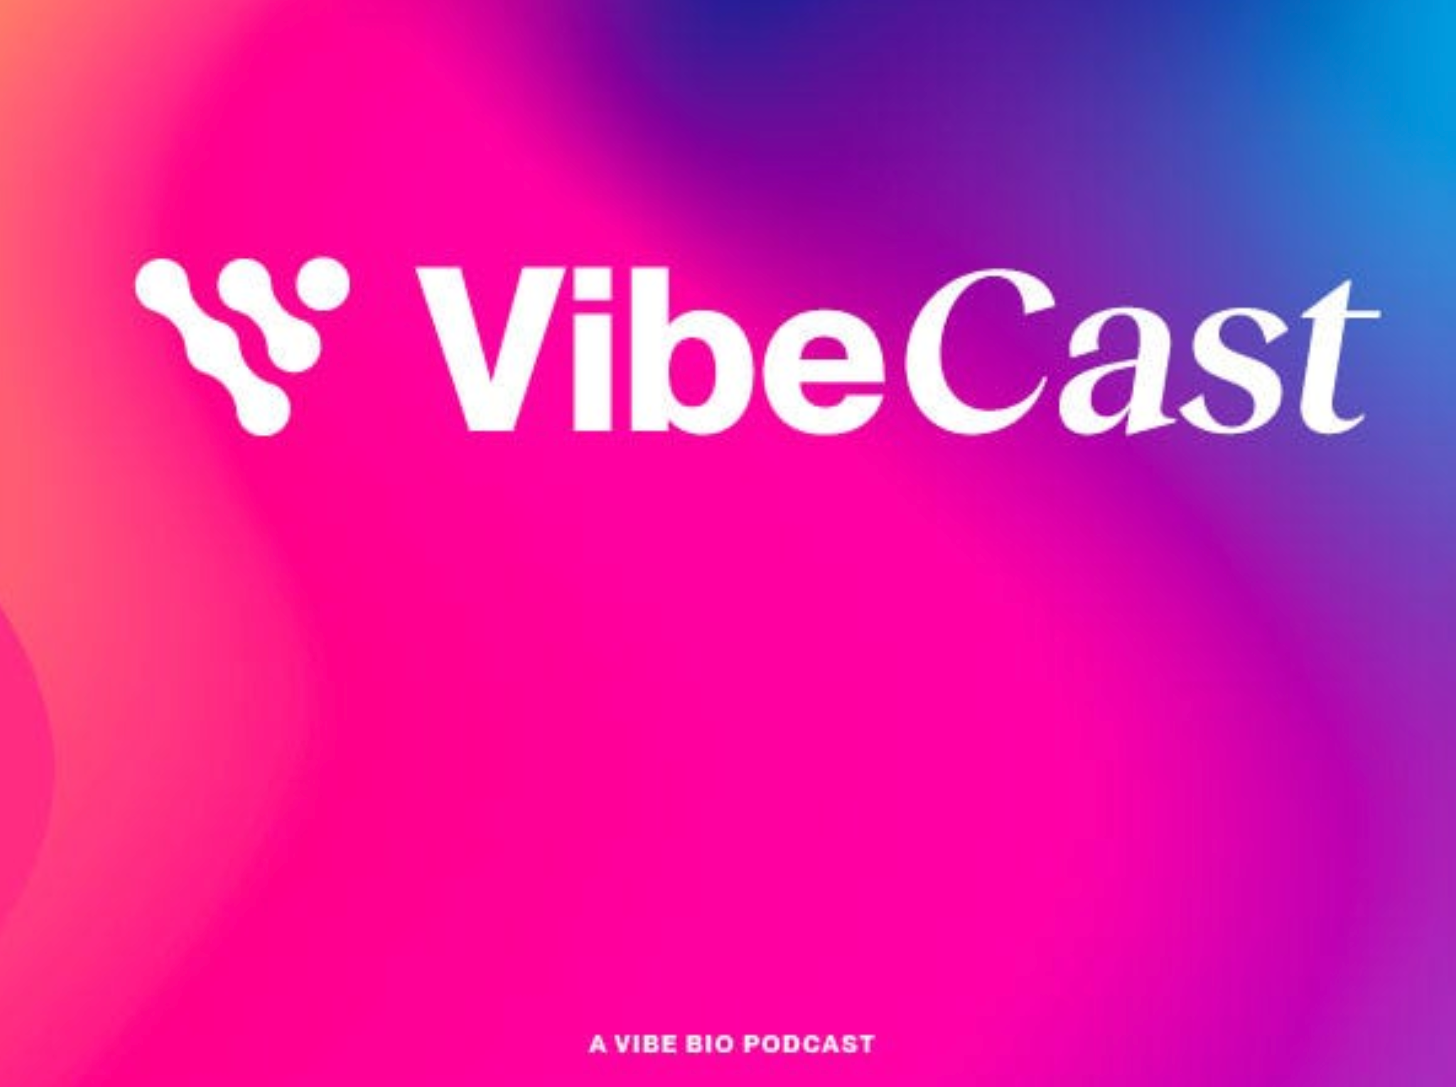 VibeCast podcast talks to CEO Mark Kotter about patients and therapies